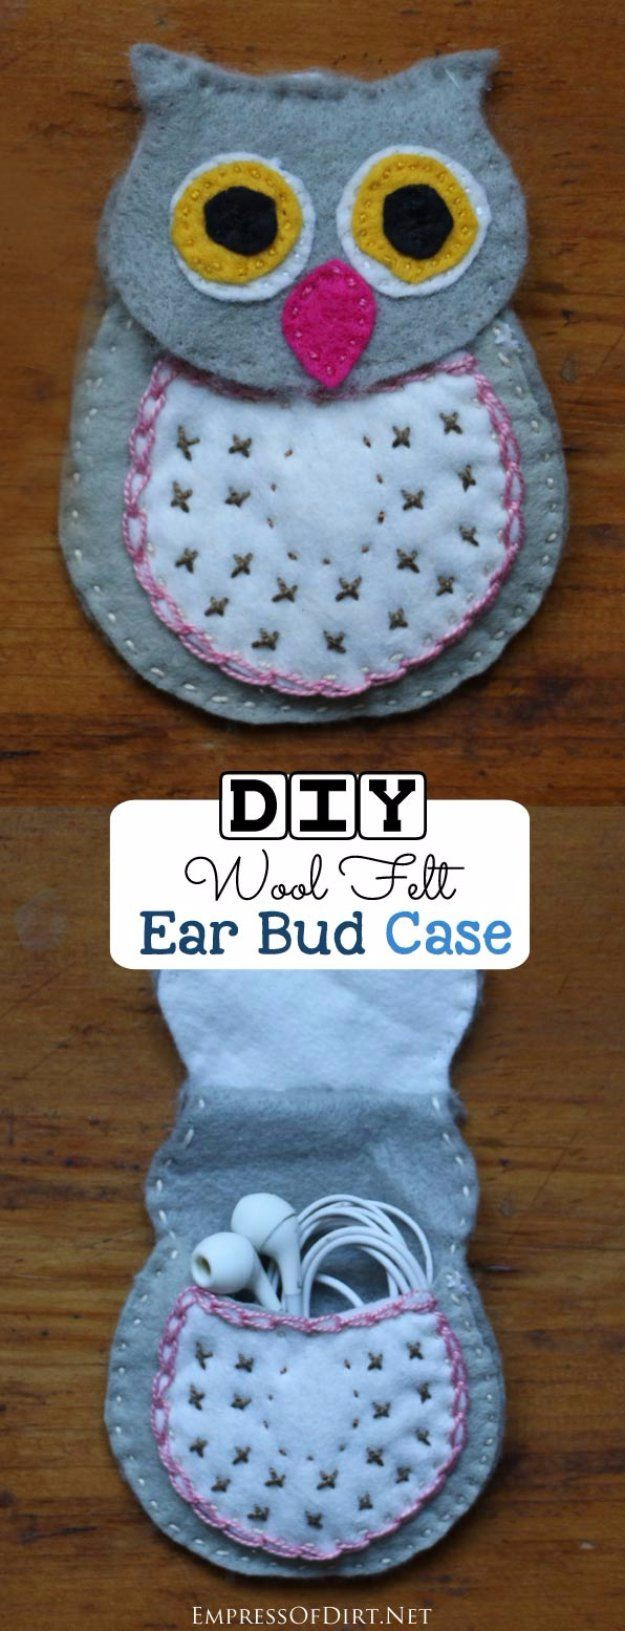 Easy DIY Gifts For Kids
 Pin by Connie Coley Middleton on Cute Projects